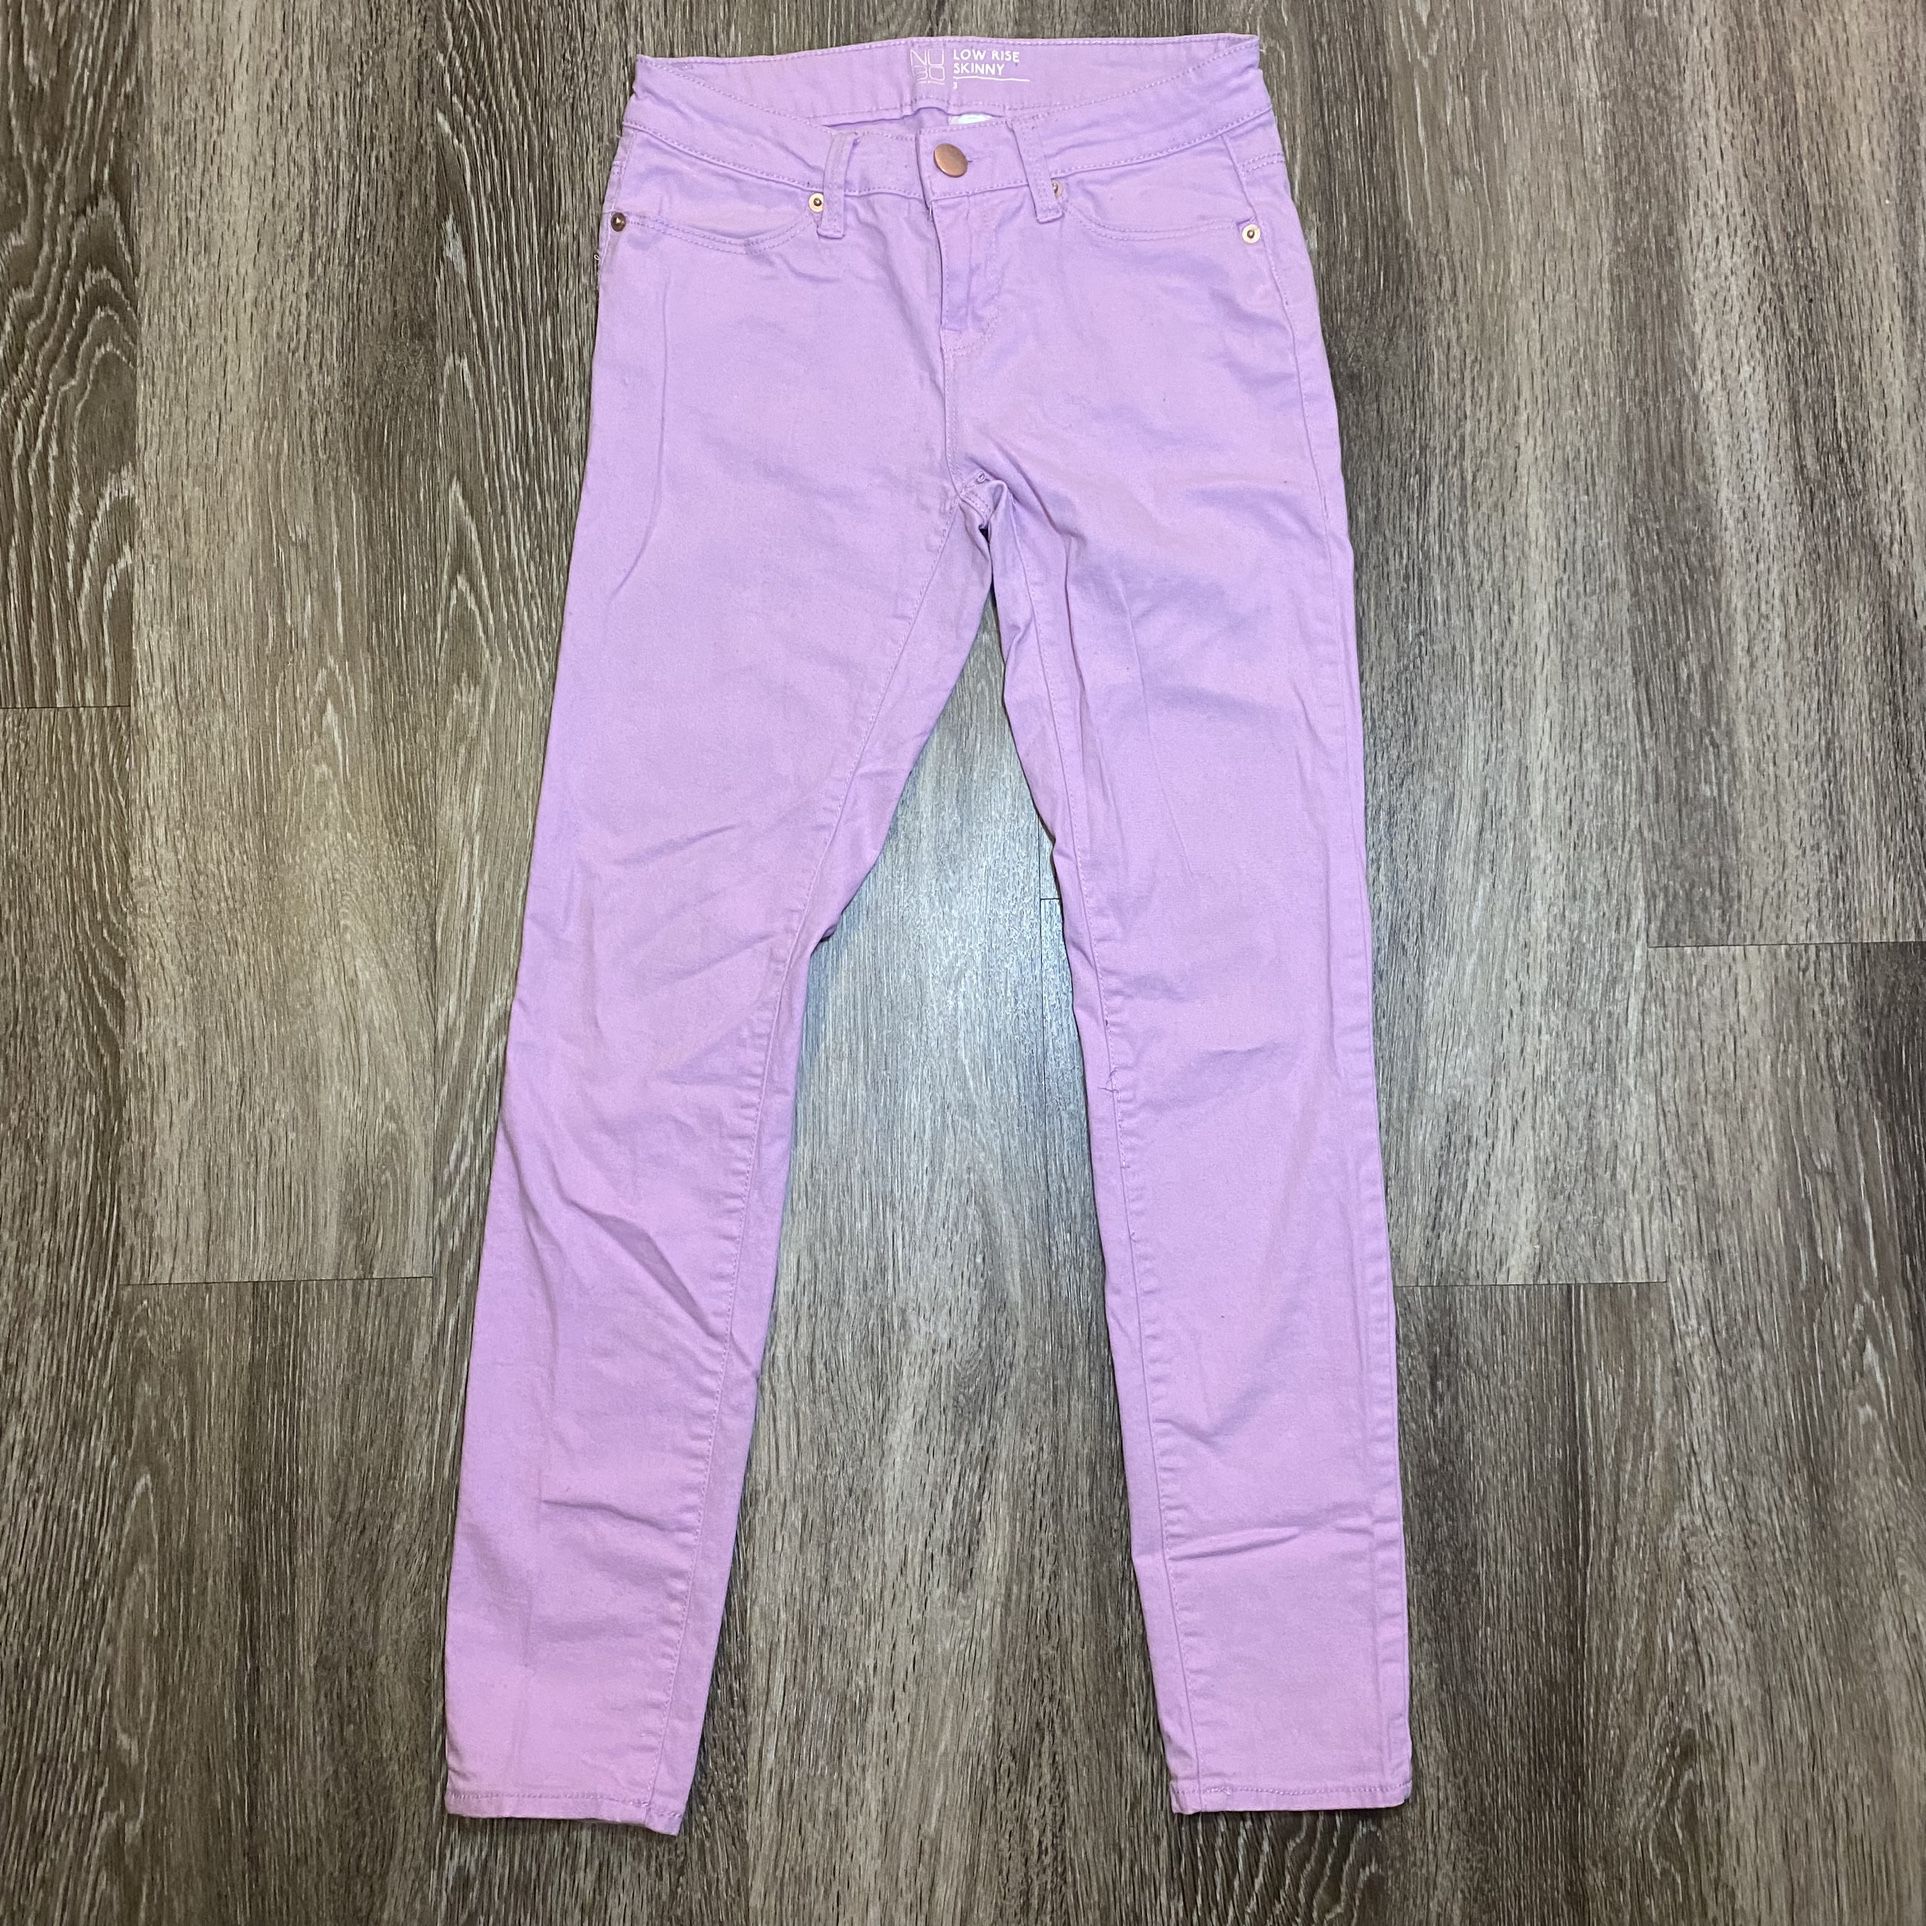 Womens Pink Low Rise Skinny Jeans - 3